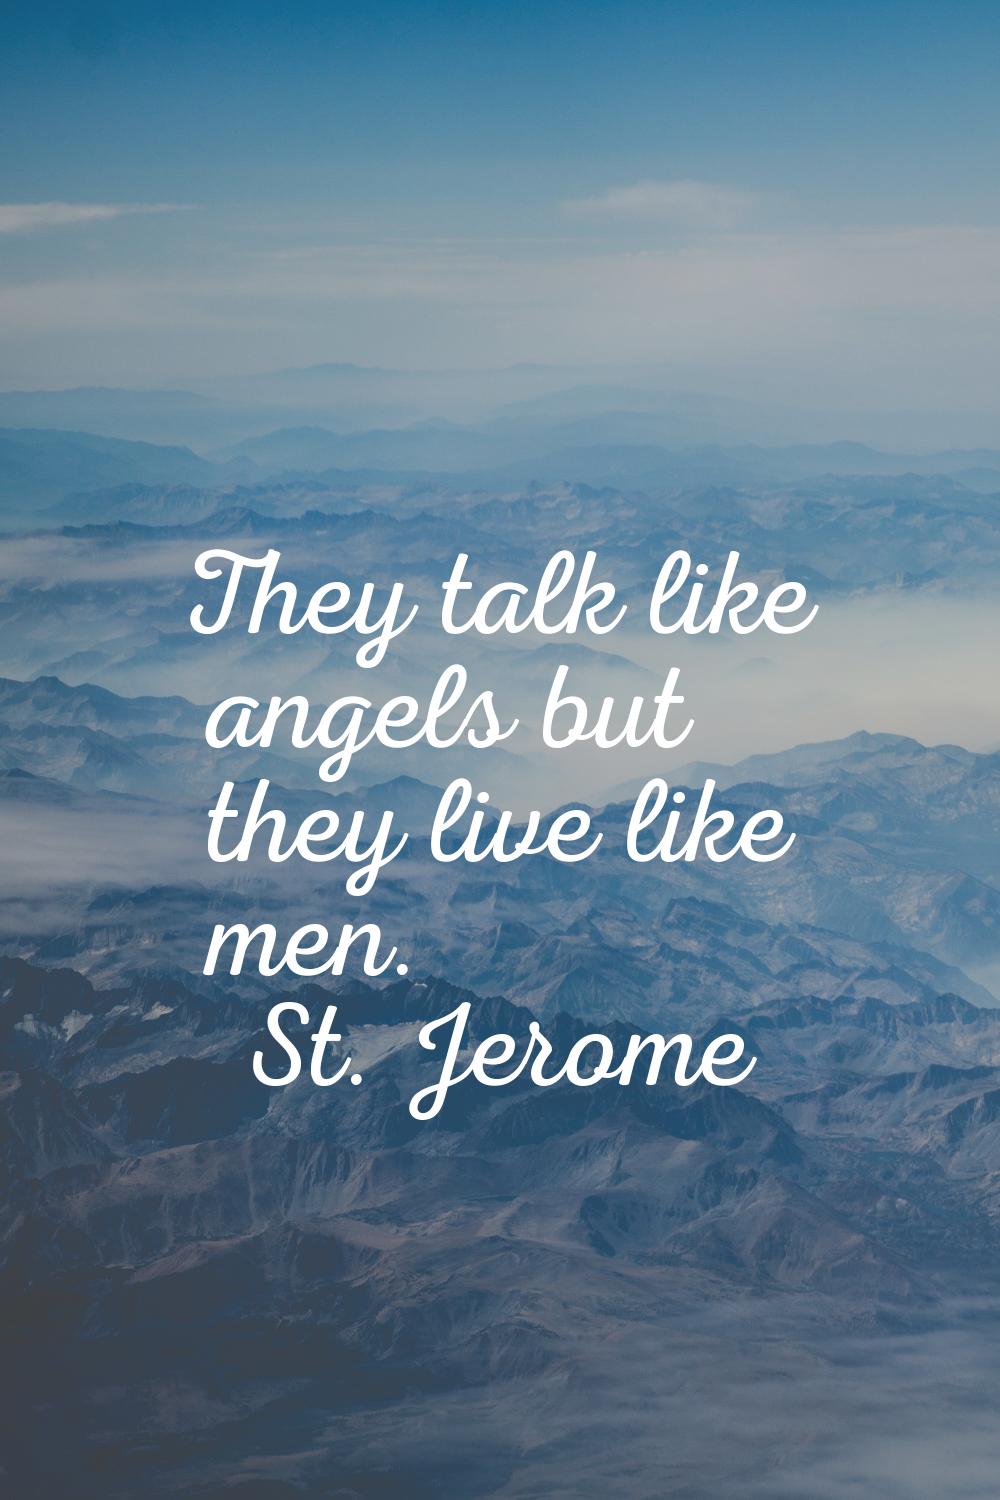 They talk like angels but they live like men.